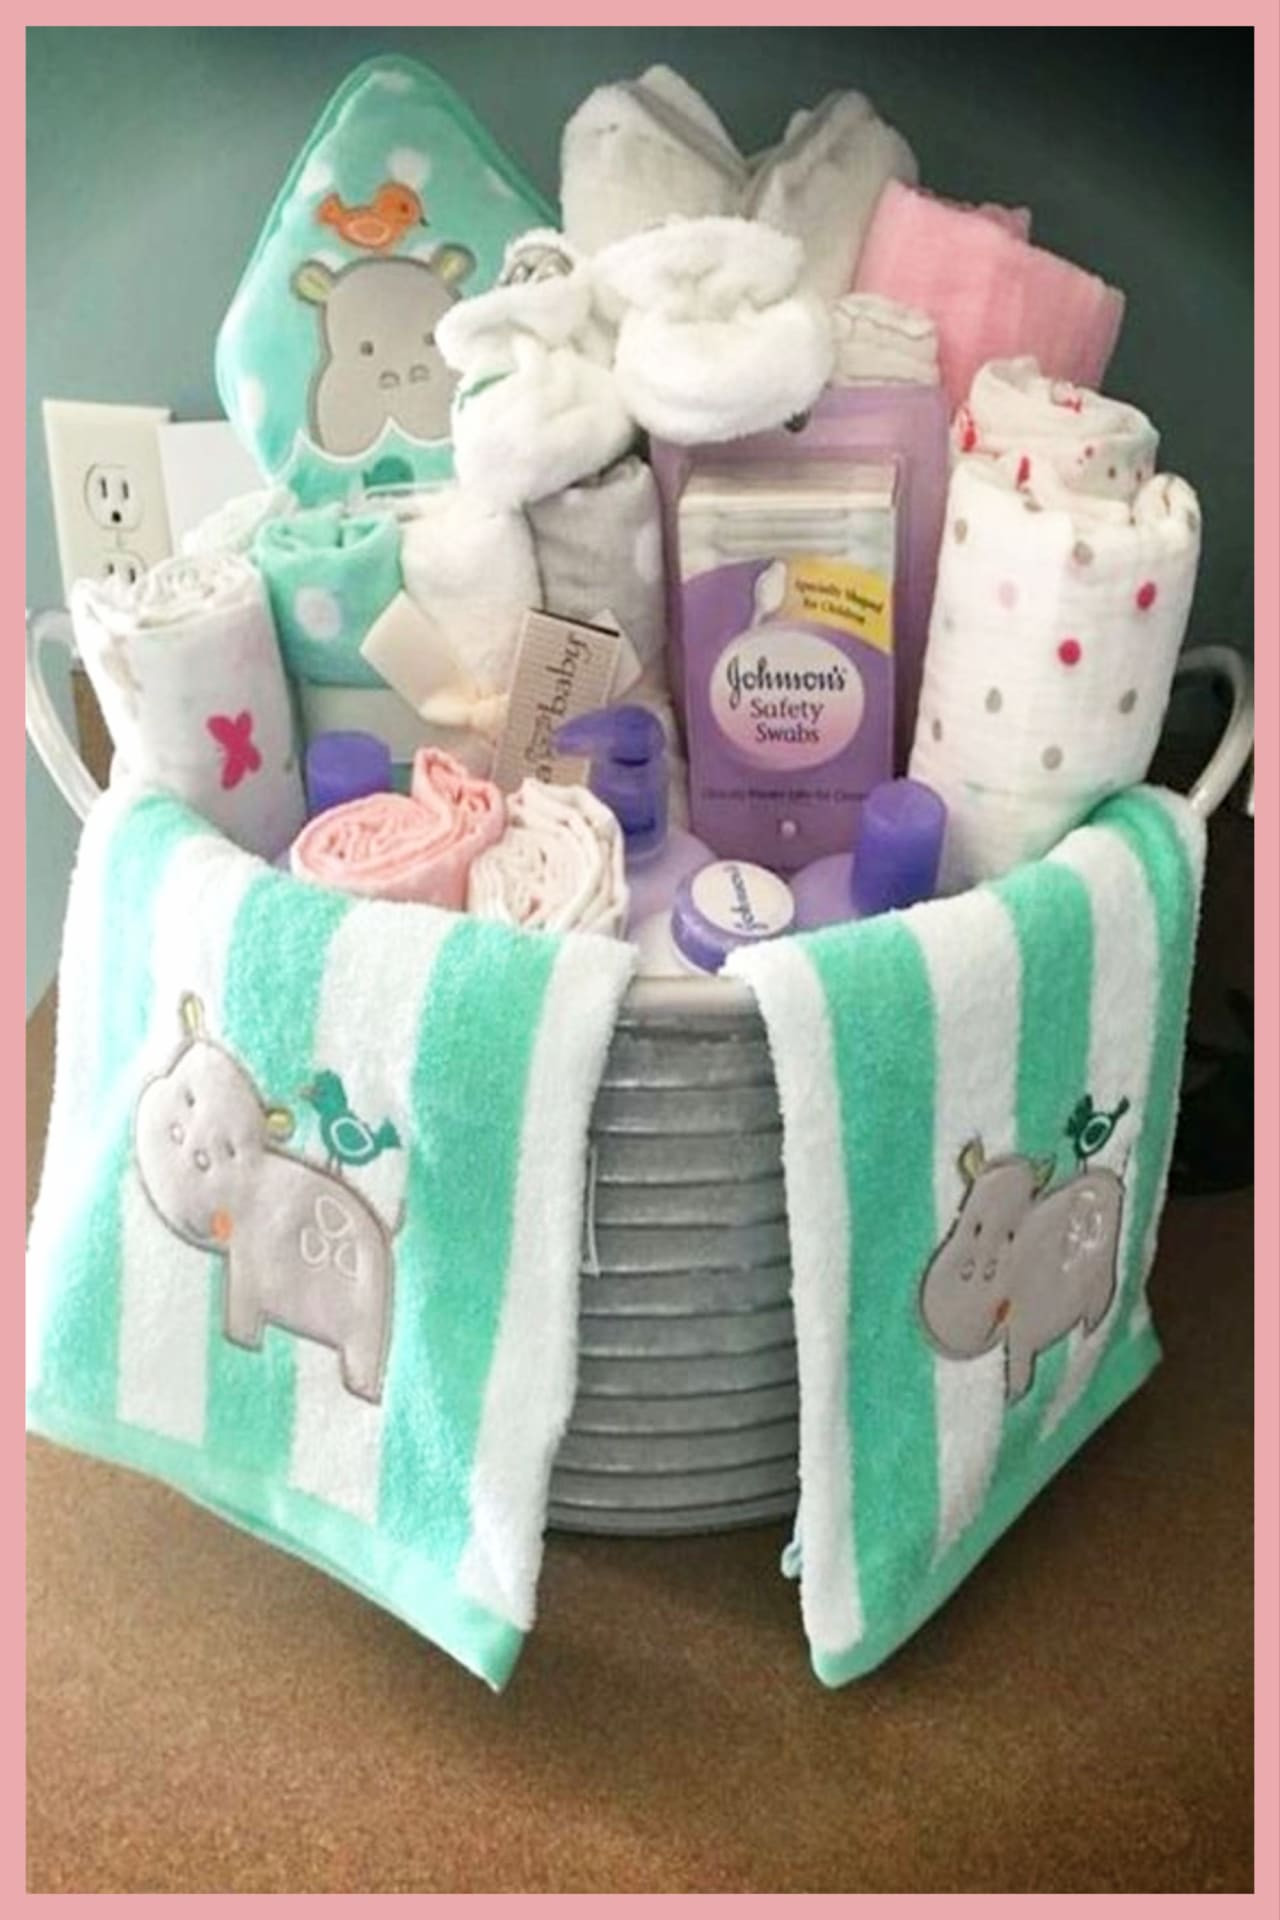 Baby Shower Gift Baskets Ideas
 28 Affordable & Cheap Baby Shower Gift Ideas For Those on